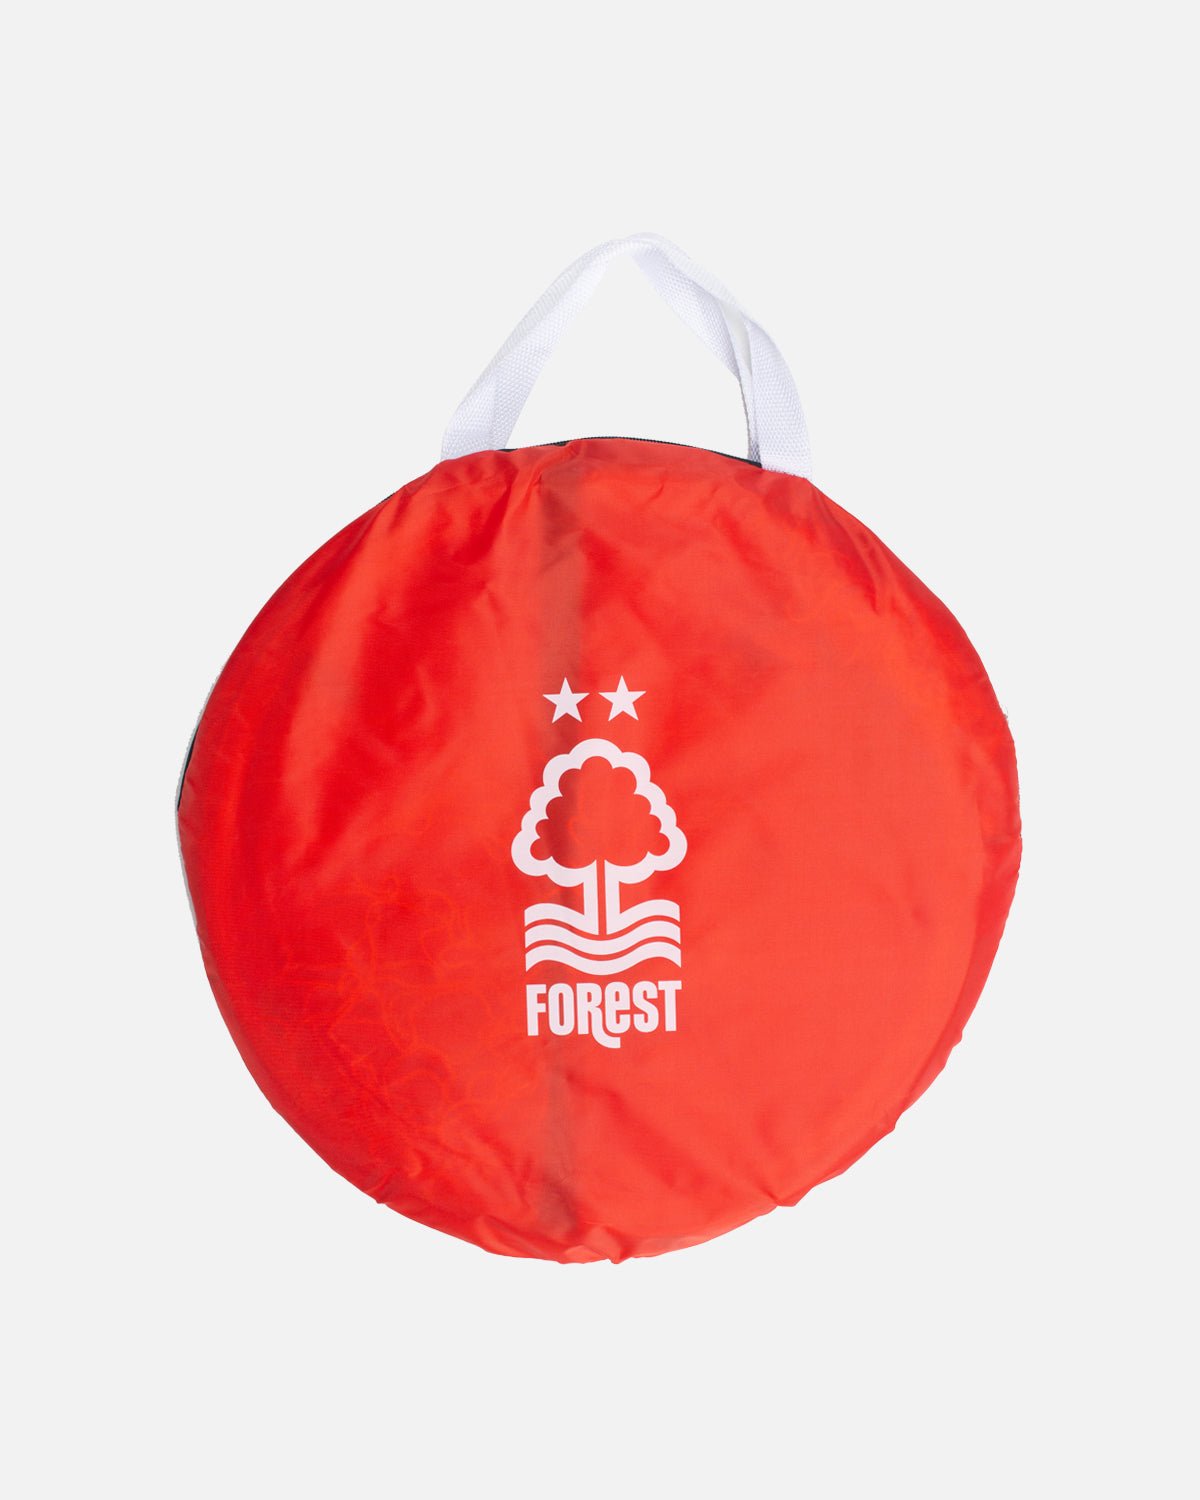 NFFC 2 in 1 Pop Up Goals - Nottingham Forest FC